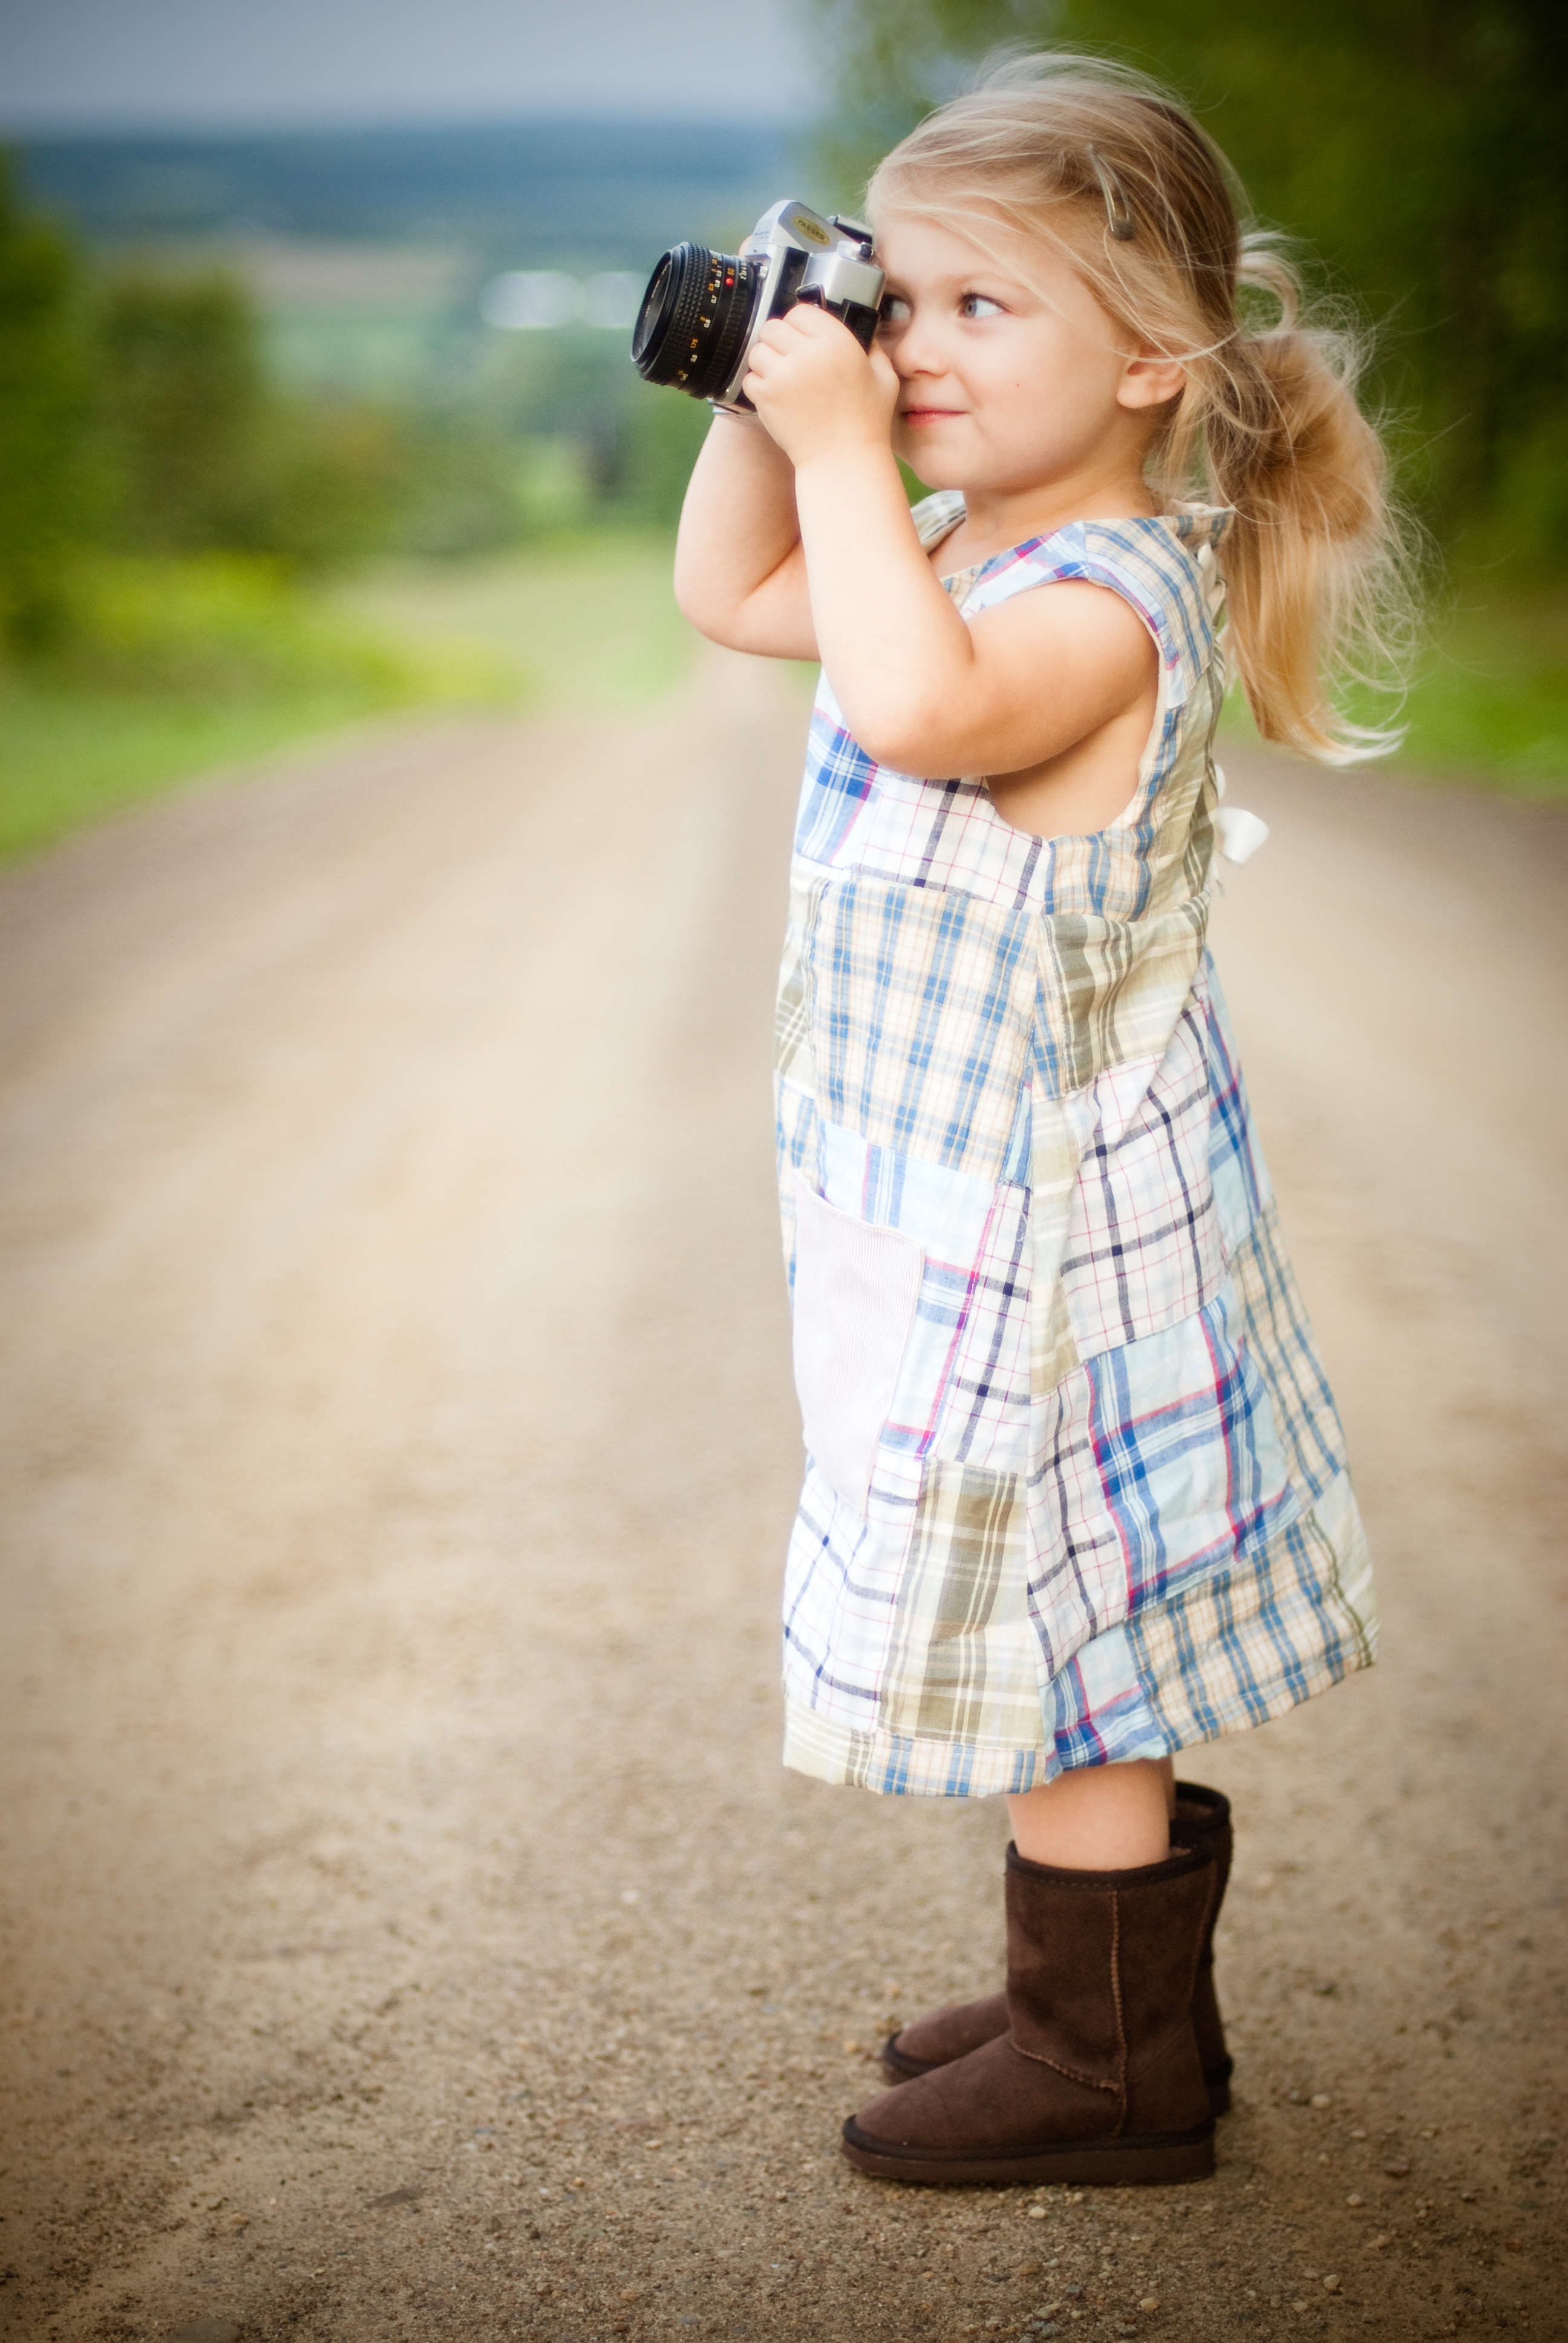 Girl With Blonde Hair and Wearing Blue and White Plaid Dress and Capturing Picture during Daytime, Blonde, Kid, Wear, Summer, HQ Photo